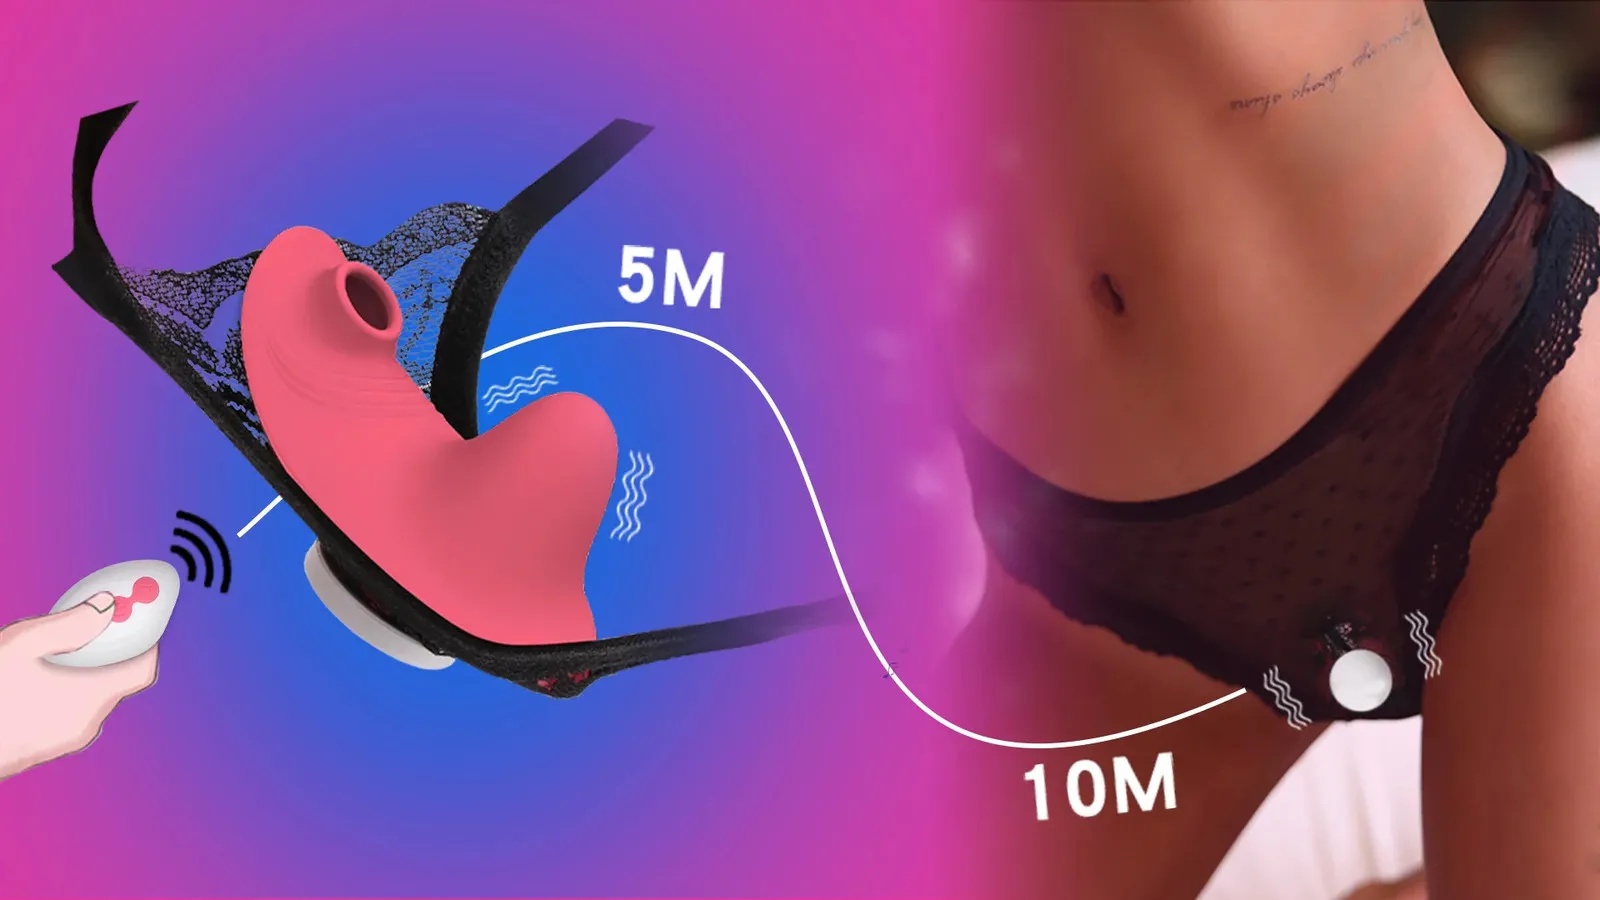 Vibrators Vibrating Panties 10 Function Wireless Remote Control  Rechargeable Bullet Vibrator Strap On Underwear Vibrator For Women Sex Toy  231213 From 10,84 €